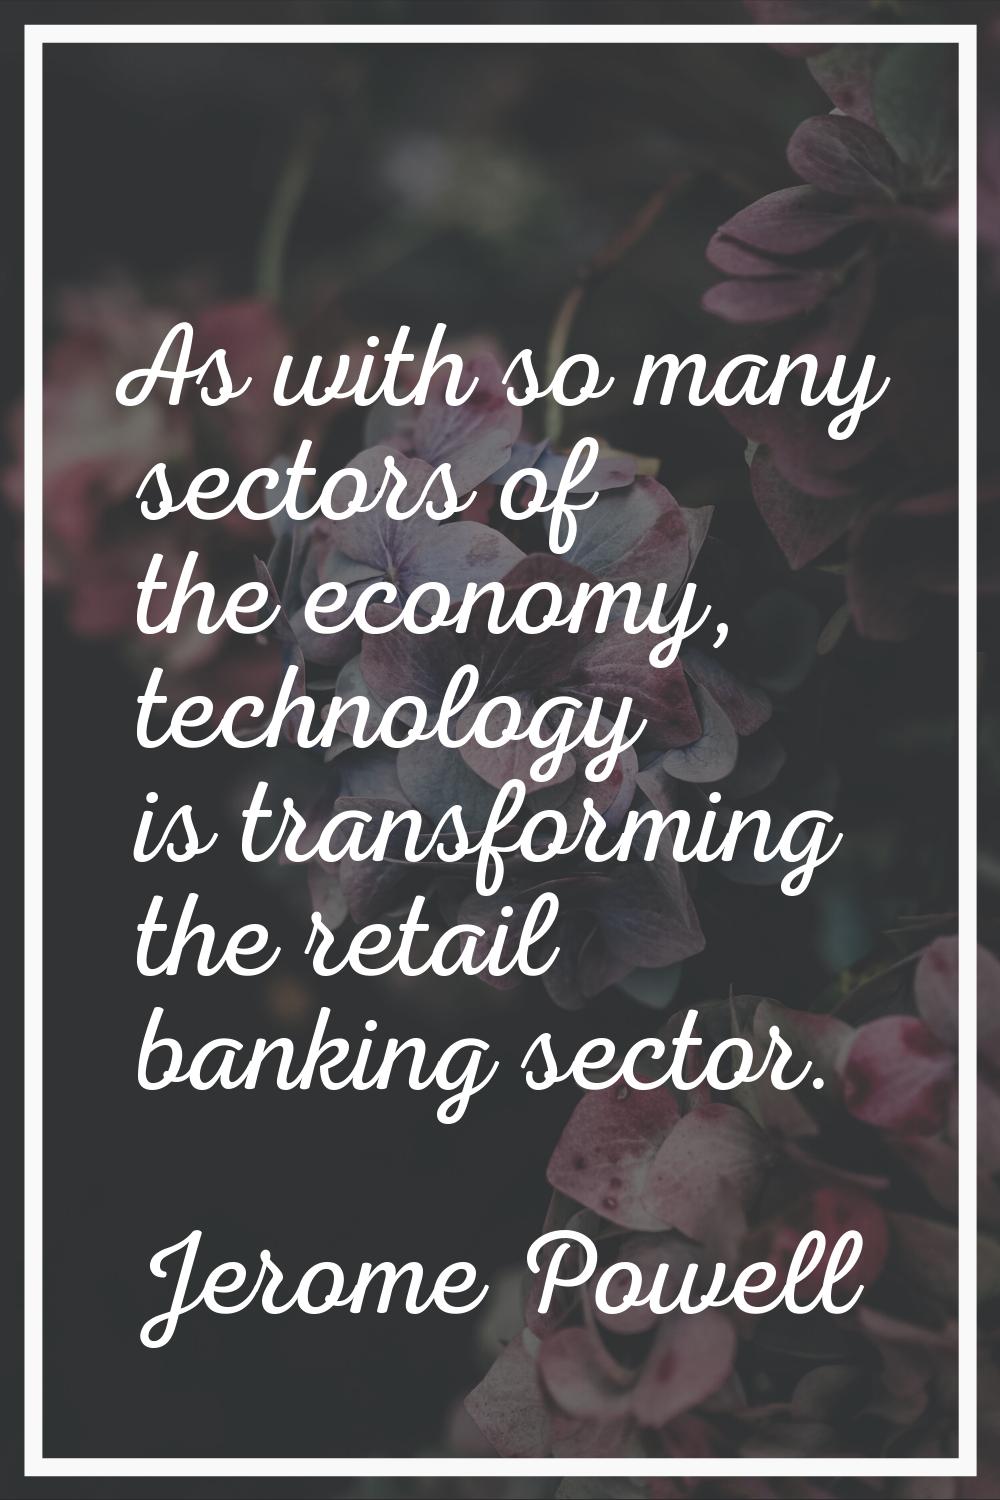 As with so many sectors of the economy, technology is transforming the retail banking sector.